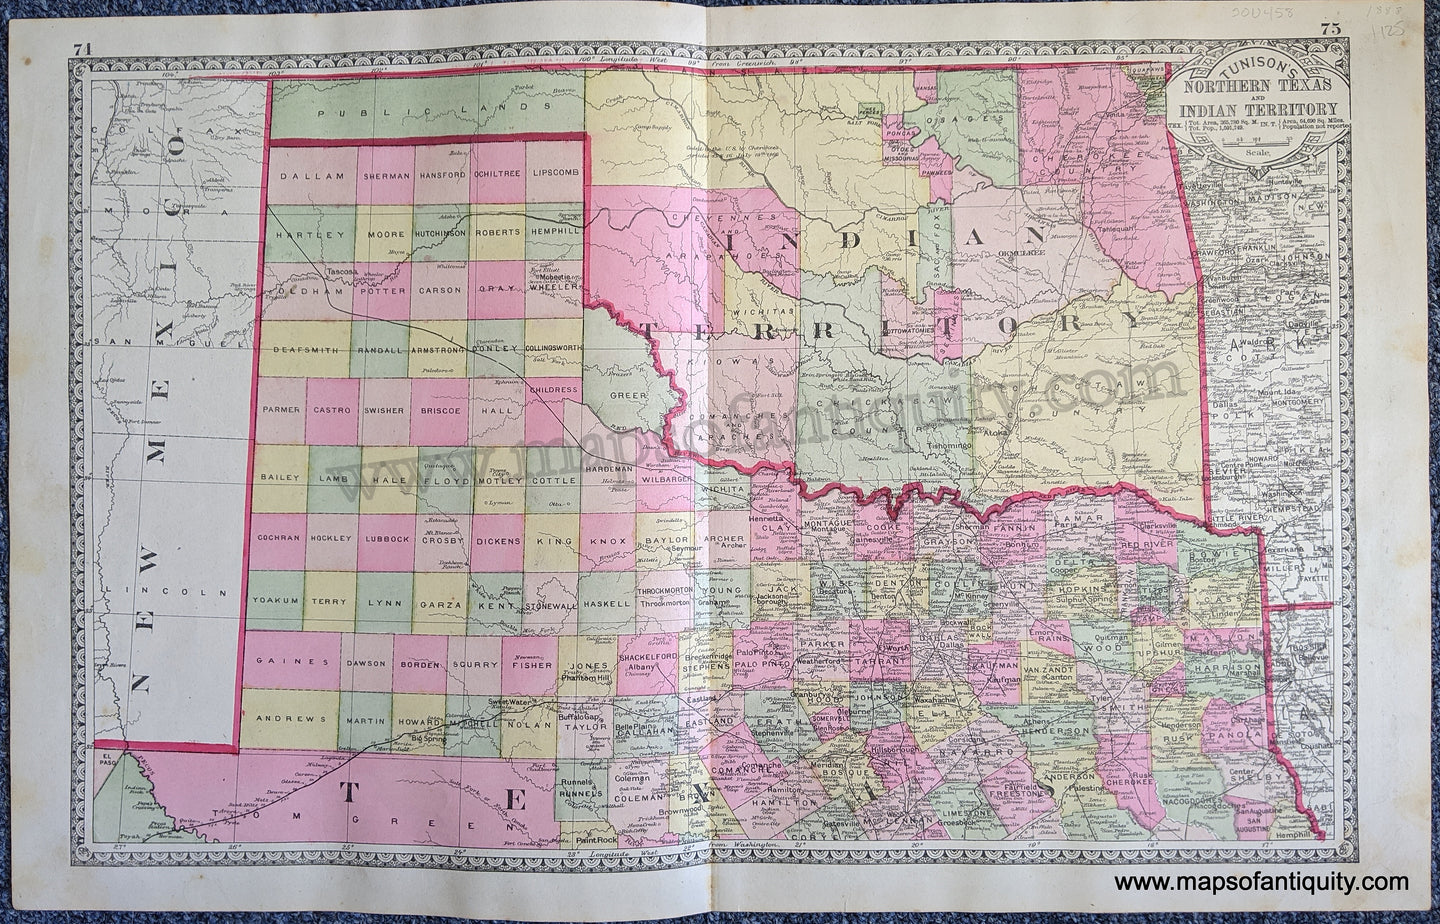 Antique-Map-Double-sided-sheet-with-multiple-maps:-Centerfold---Tunison's-Northern-Texas-and-Indian-Territory;-versos:-Tunison's-Nebraska-/-Tunison's-Alabama-United-States-Texas-1888-Tunison-Maps-Of-Antiquity-1800s-19th-century